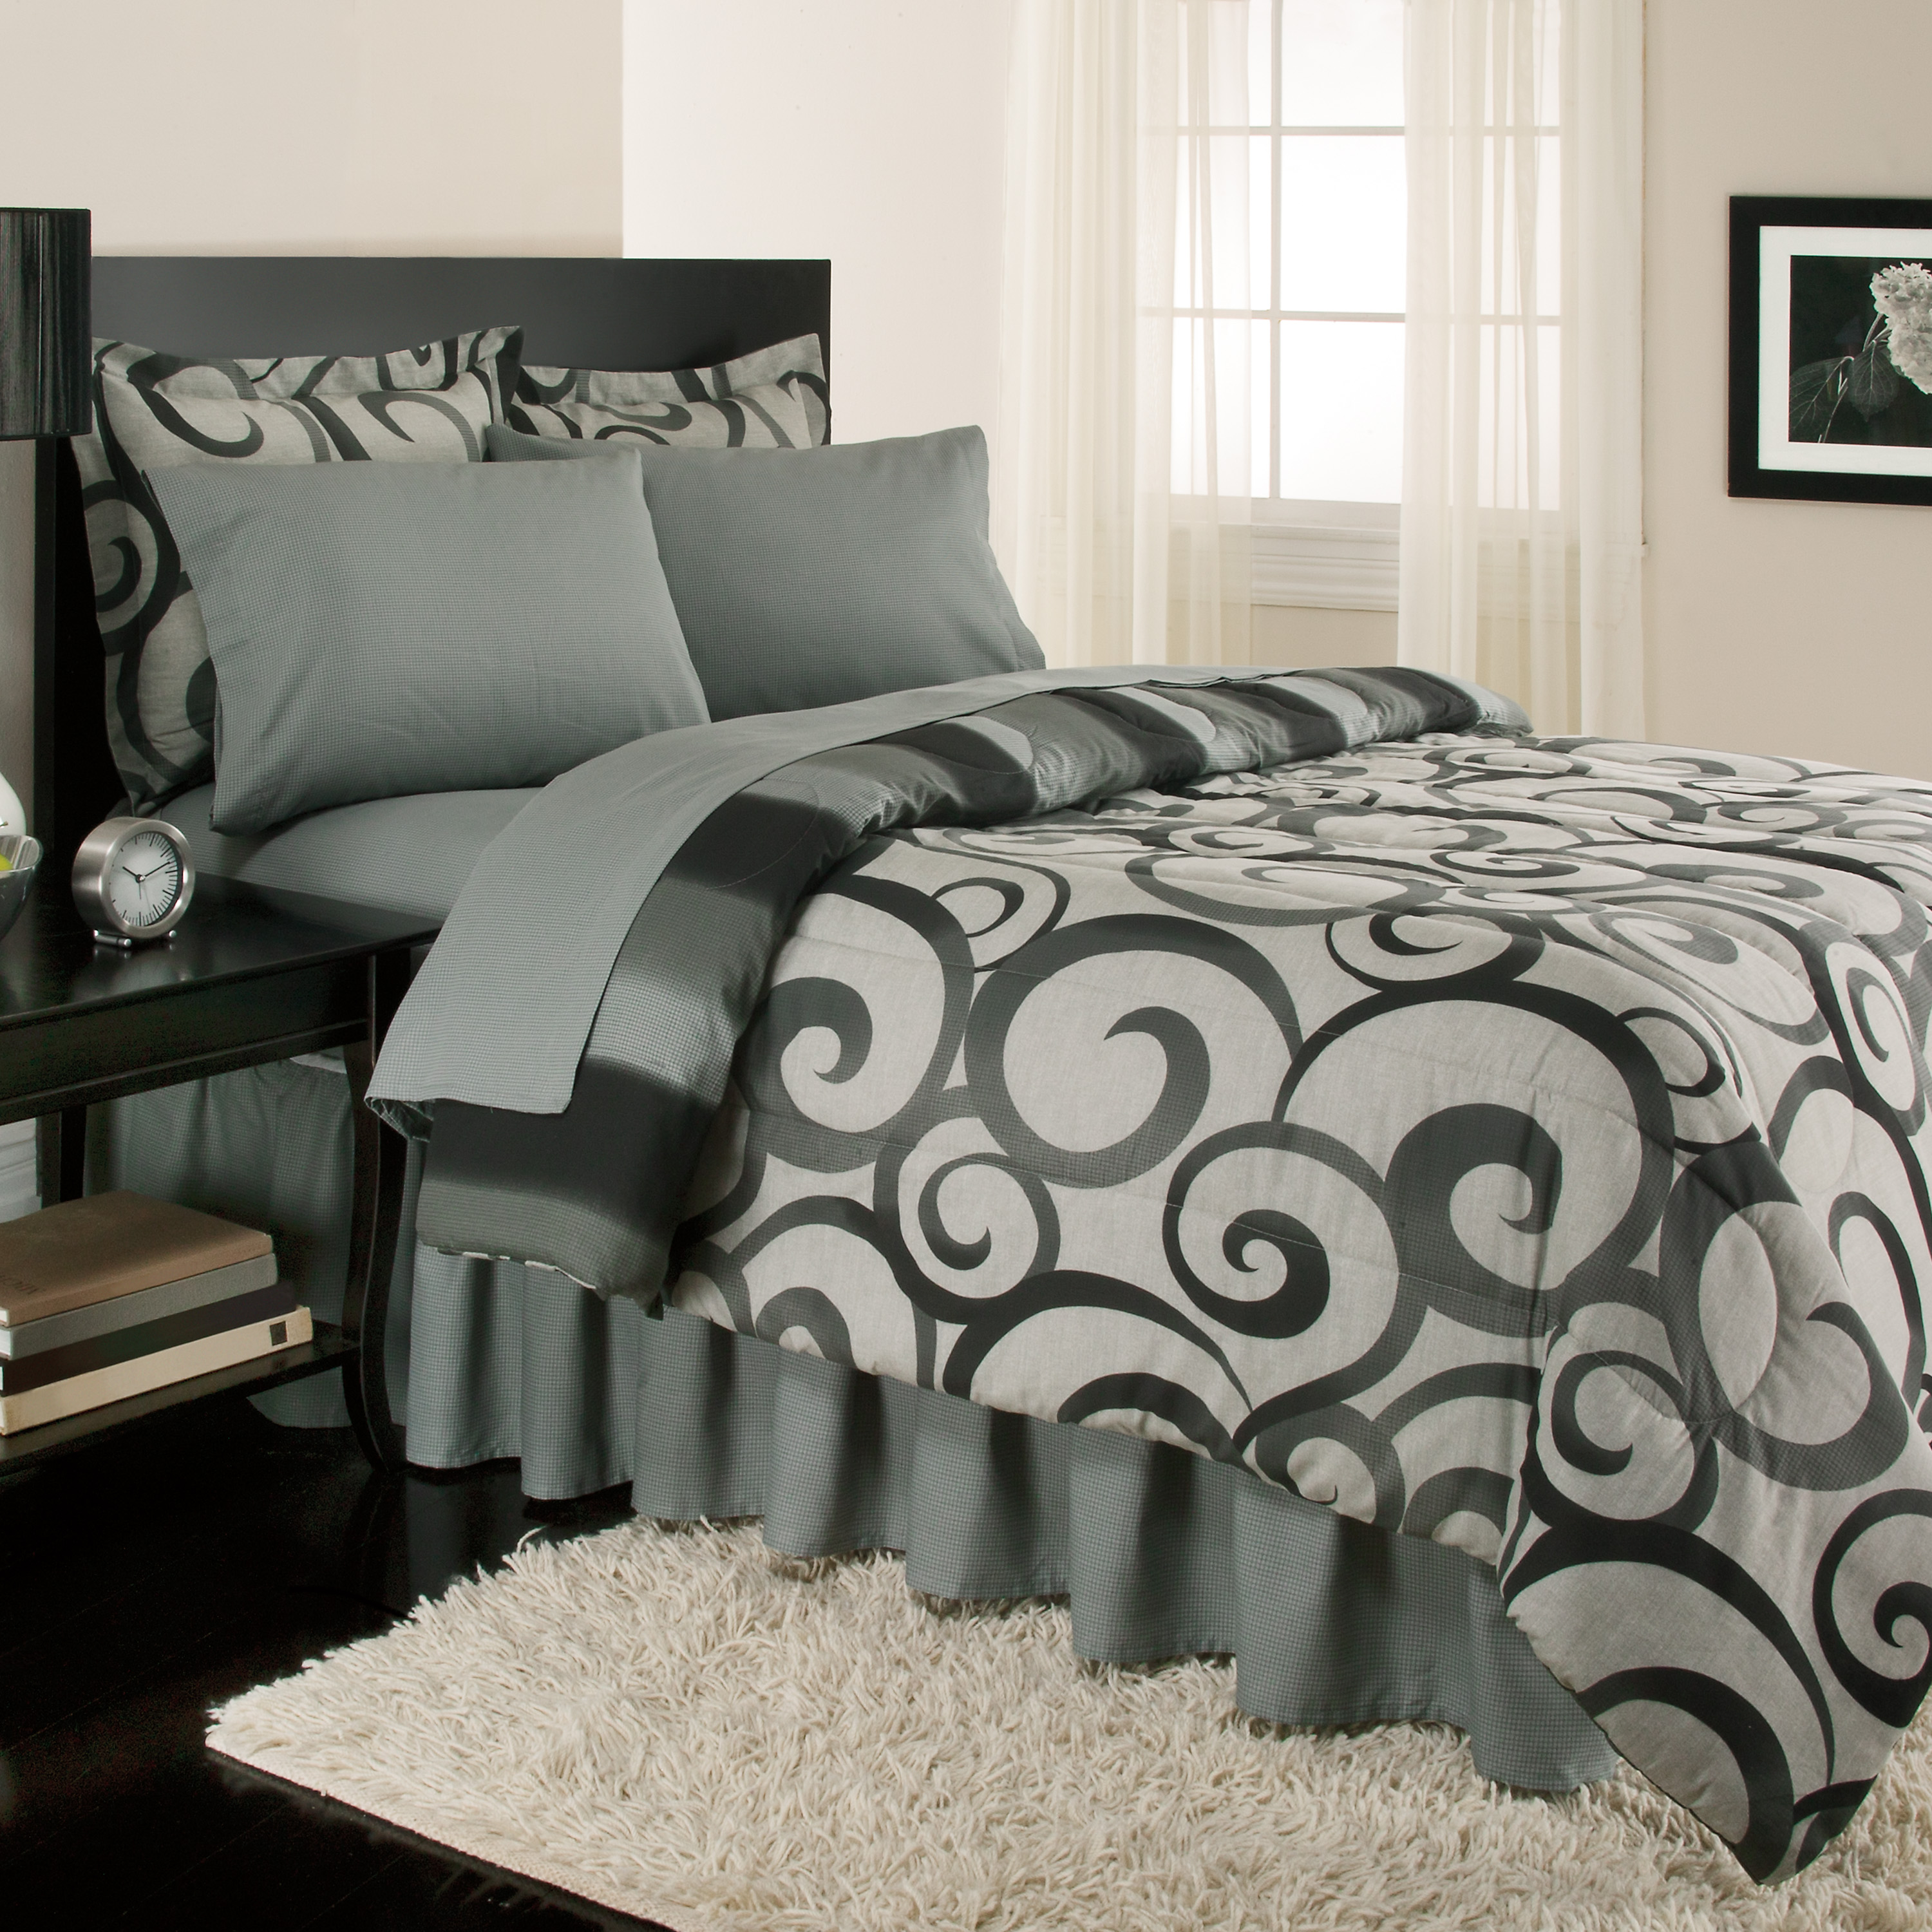 Sloane Street Alessandro Scroll, Reversible, Complete Set With Bonus Bed Skirt By Royale Linens - image 1 of 3